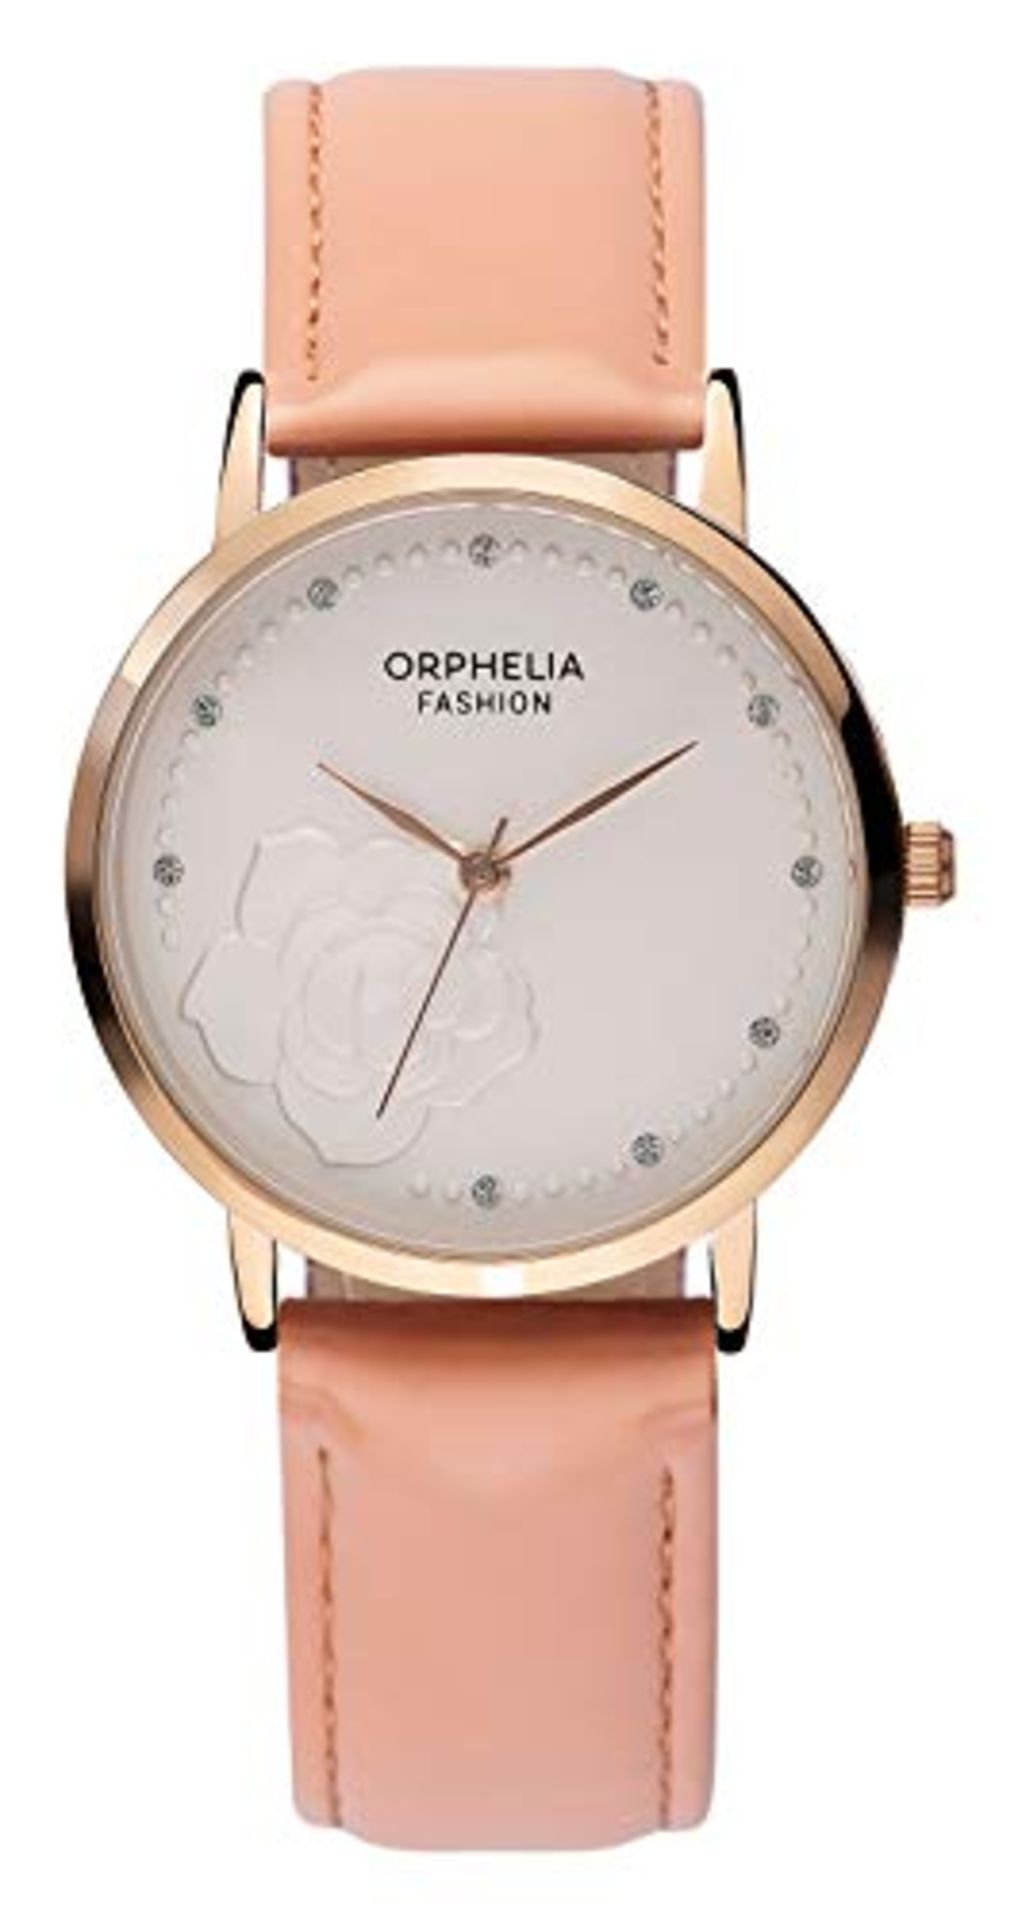 Orphelia Fashion Women's Analog Watch Petal Blossom with Leather Strap, Pink